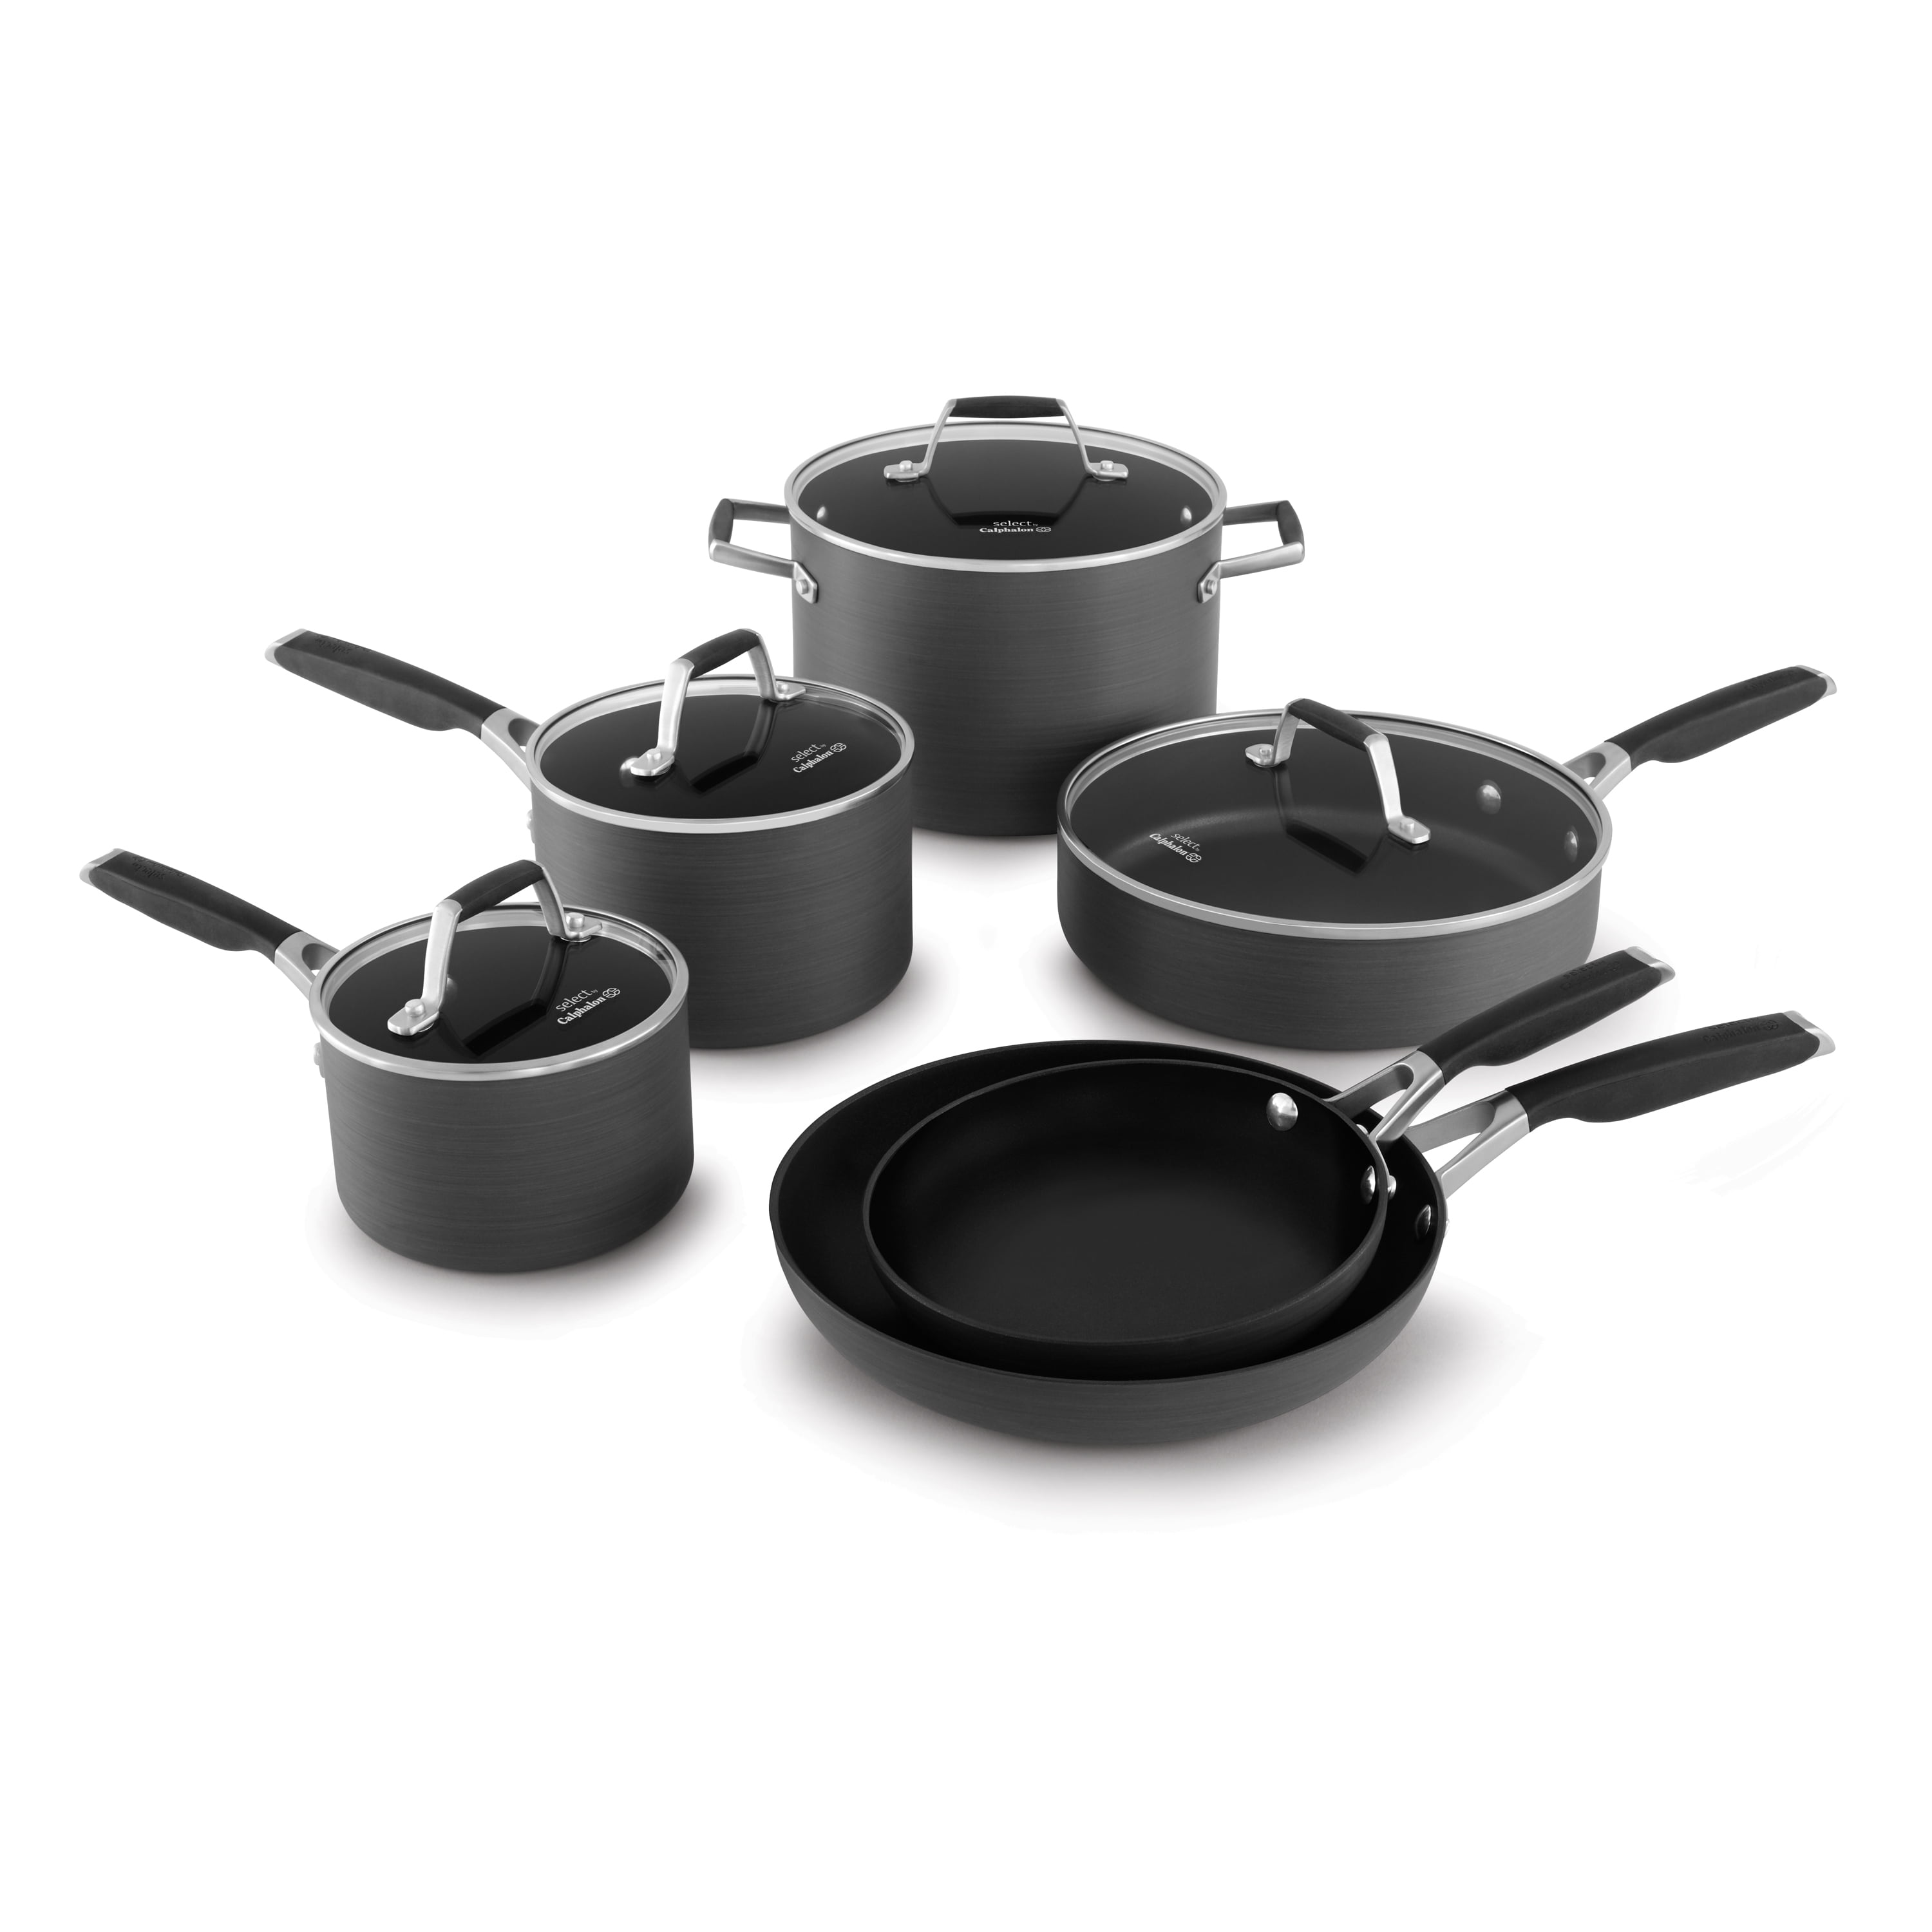 Why I Love the Carote Nonstick Cookware Set: Tried & Tested